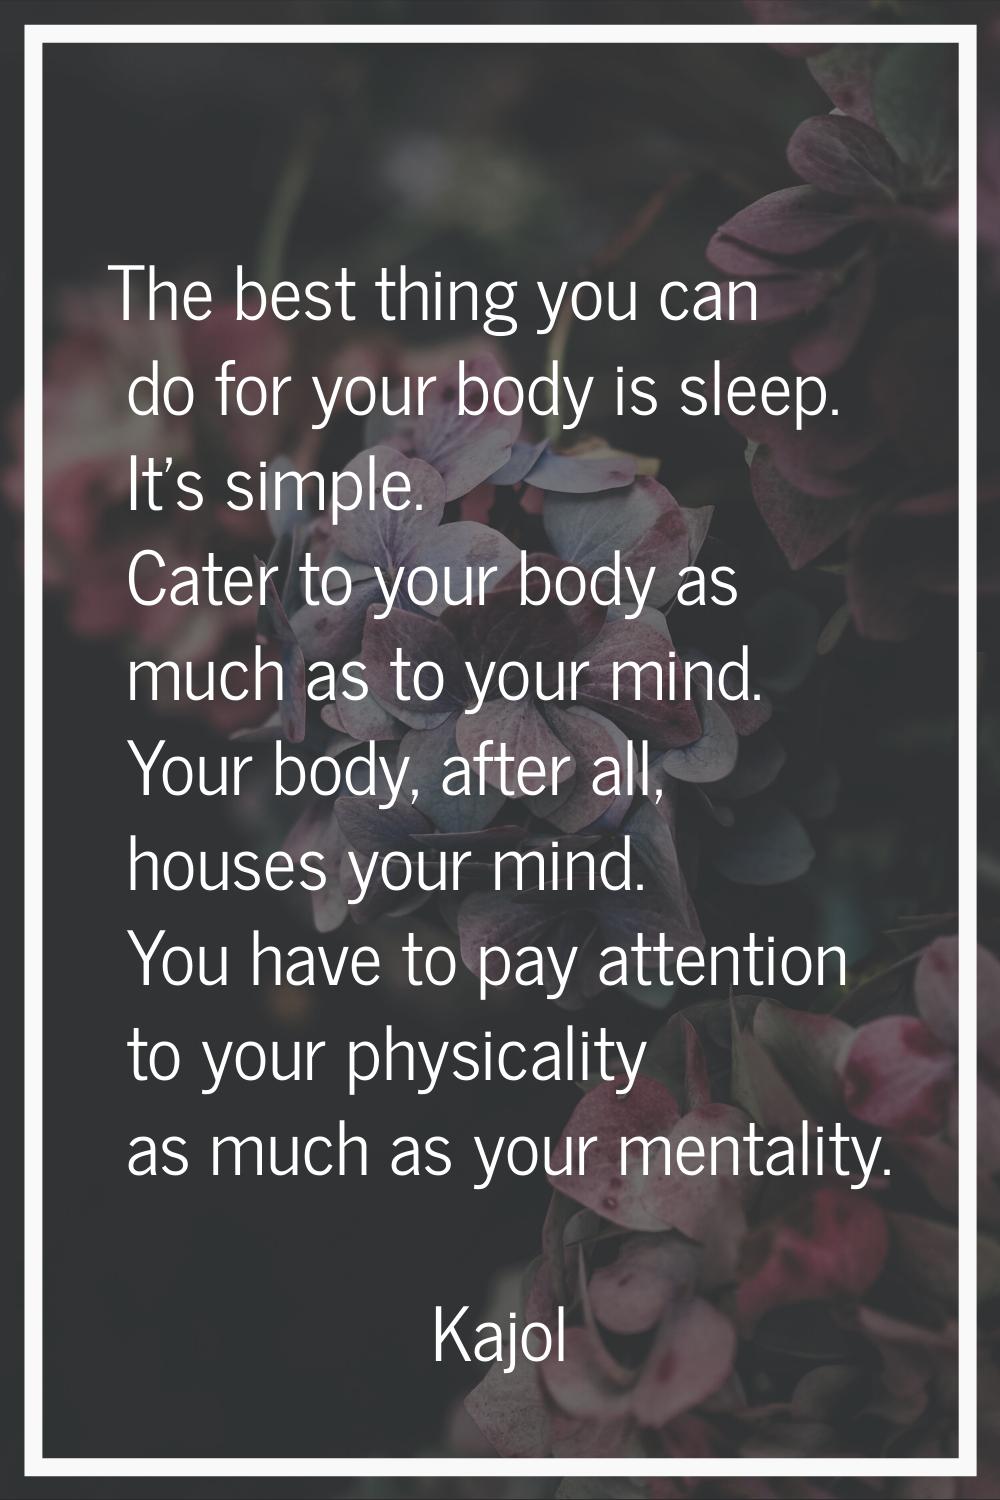 The best thing you can do for your body is sleep. It's simple. Cater to your body as much as to you